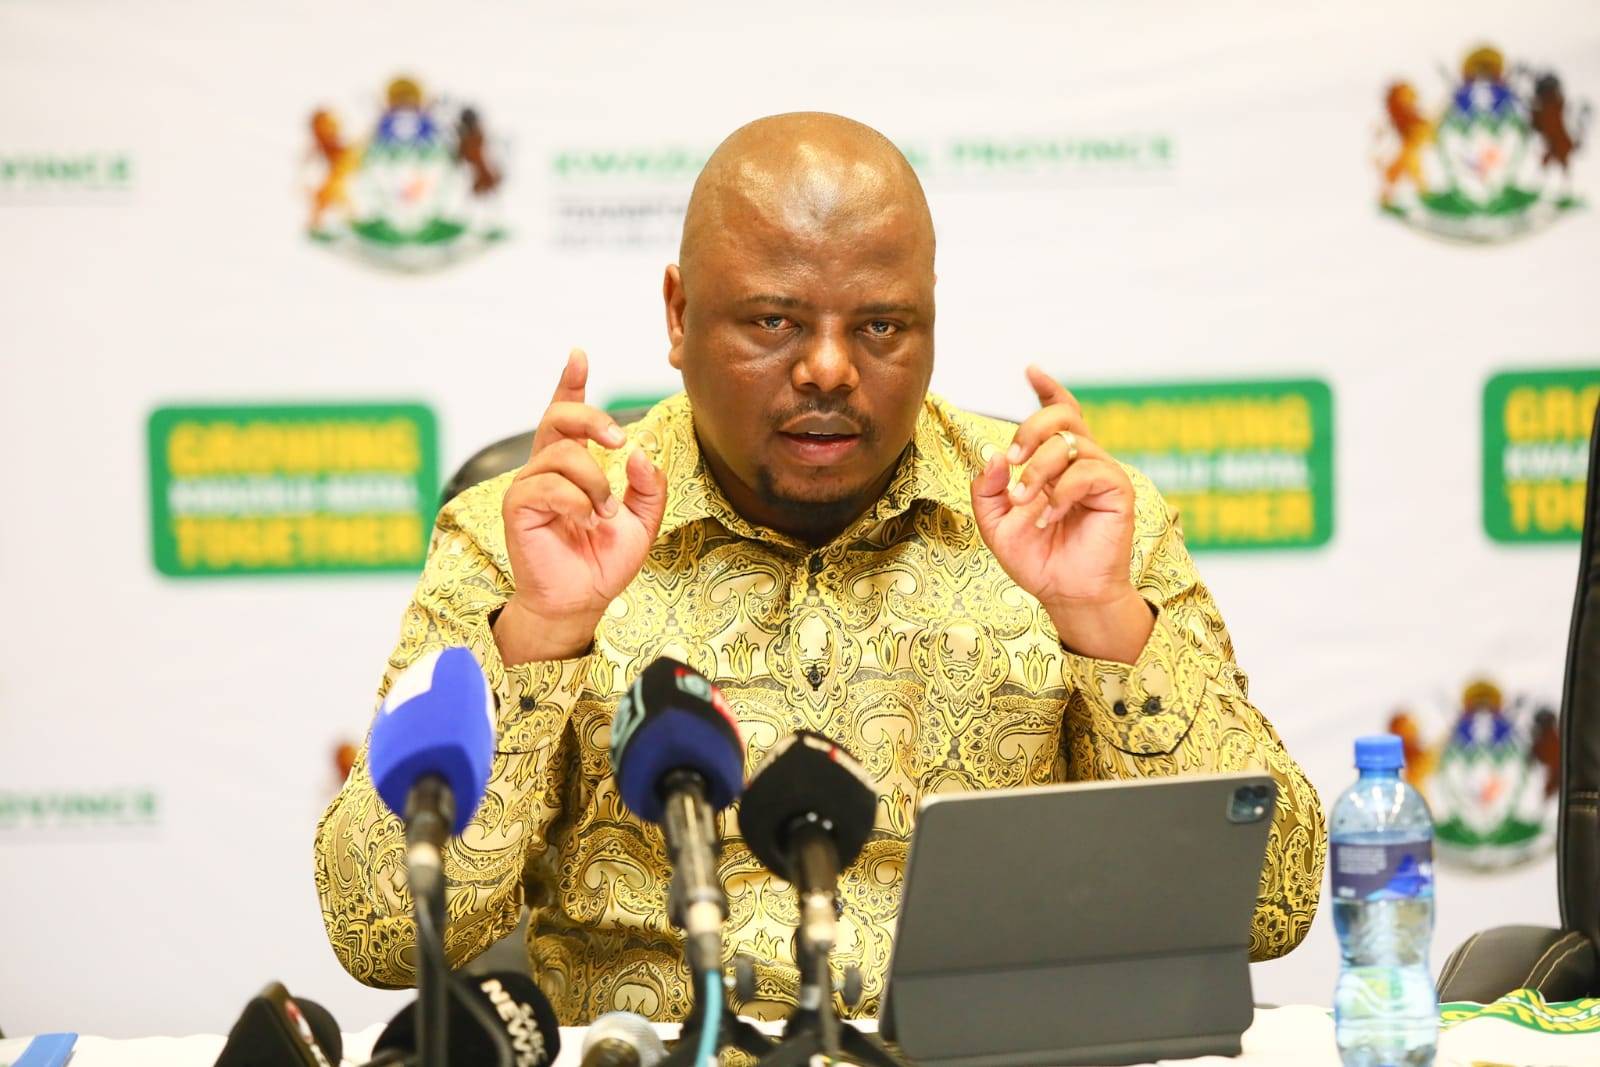 KZN MEC of Transport Sipho Hlomuka announced that the province would have new vehicle registrations beginning in December.